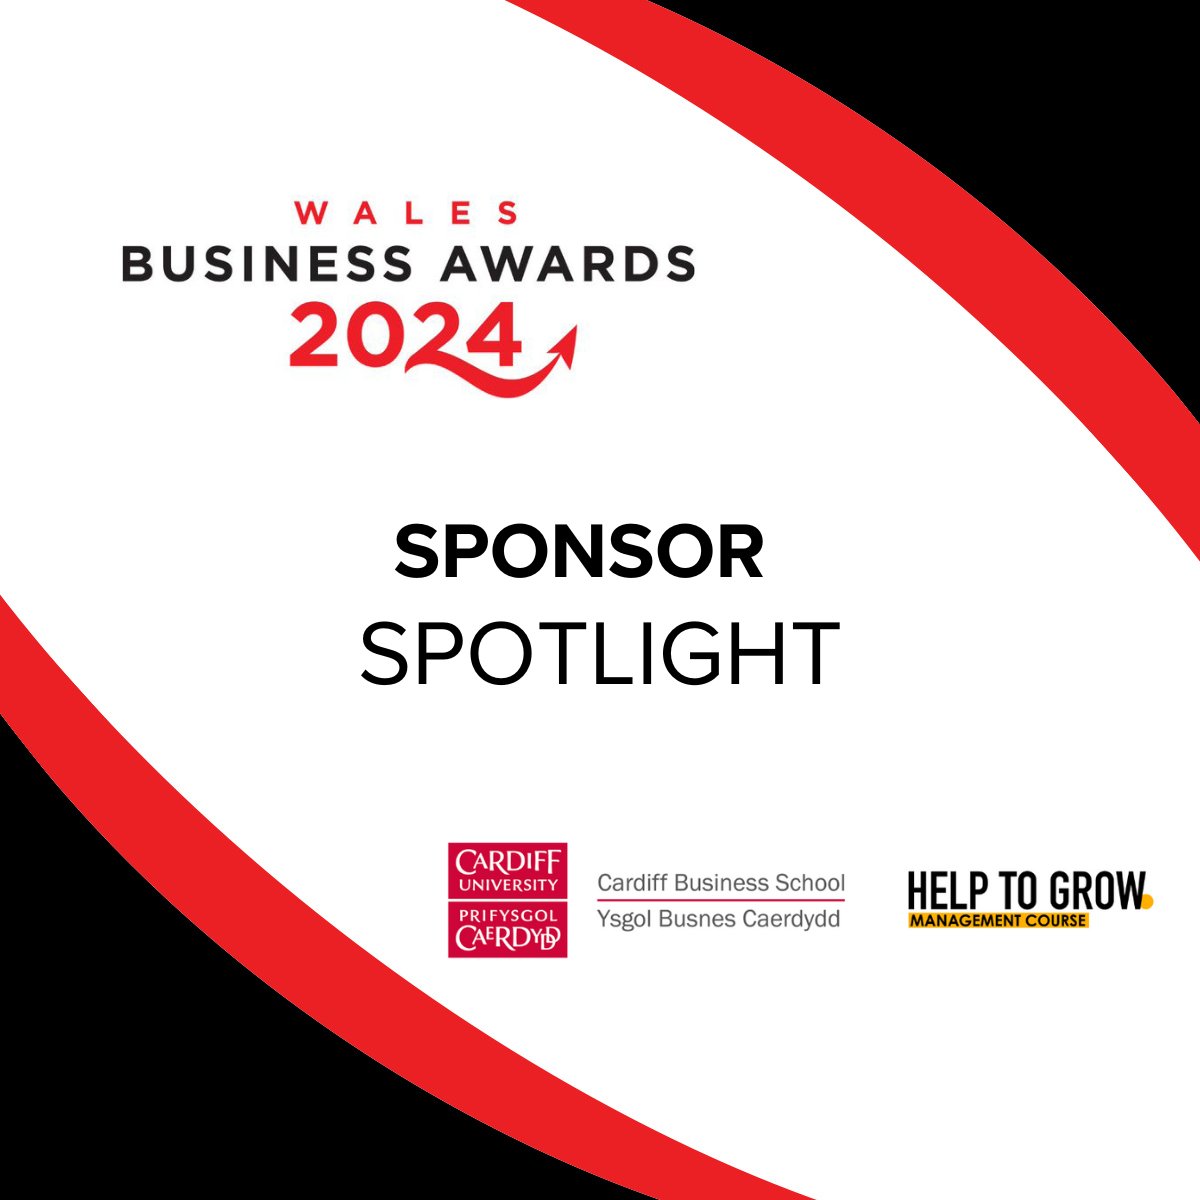 The Young Entrepreneur of the Year award recognises young people who are successfully running or leading their own business. @cardiffbusiness’ Help to Grow: Management course is sponsoring this award: cw-seswm.com/news/introduci…